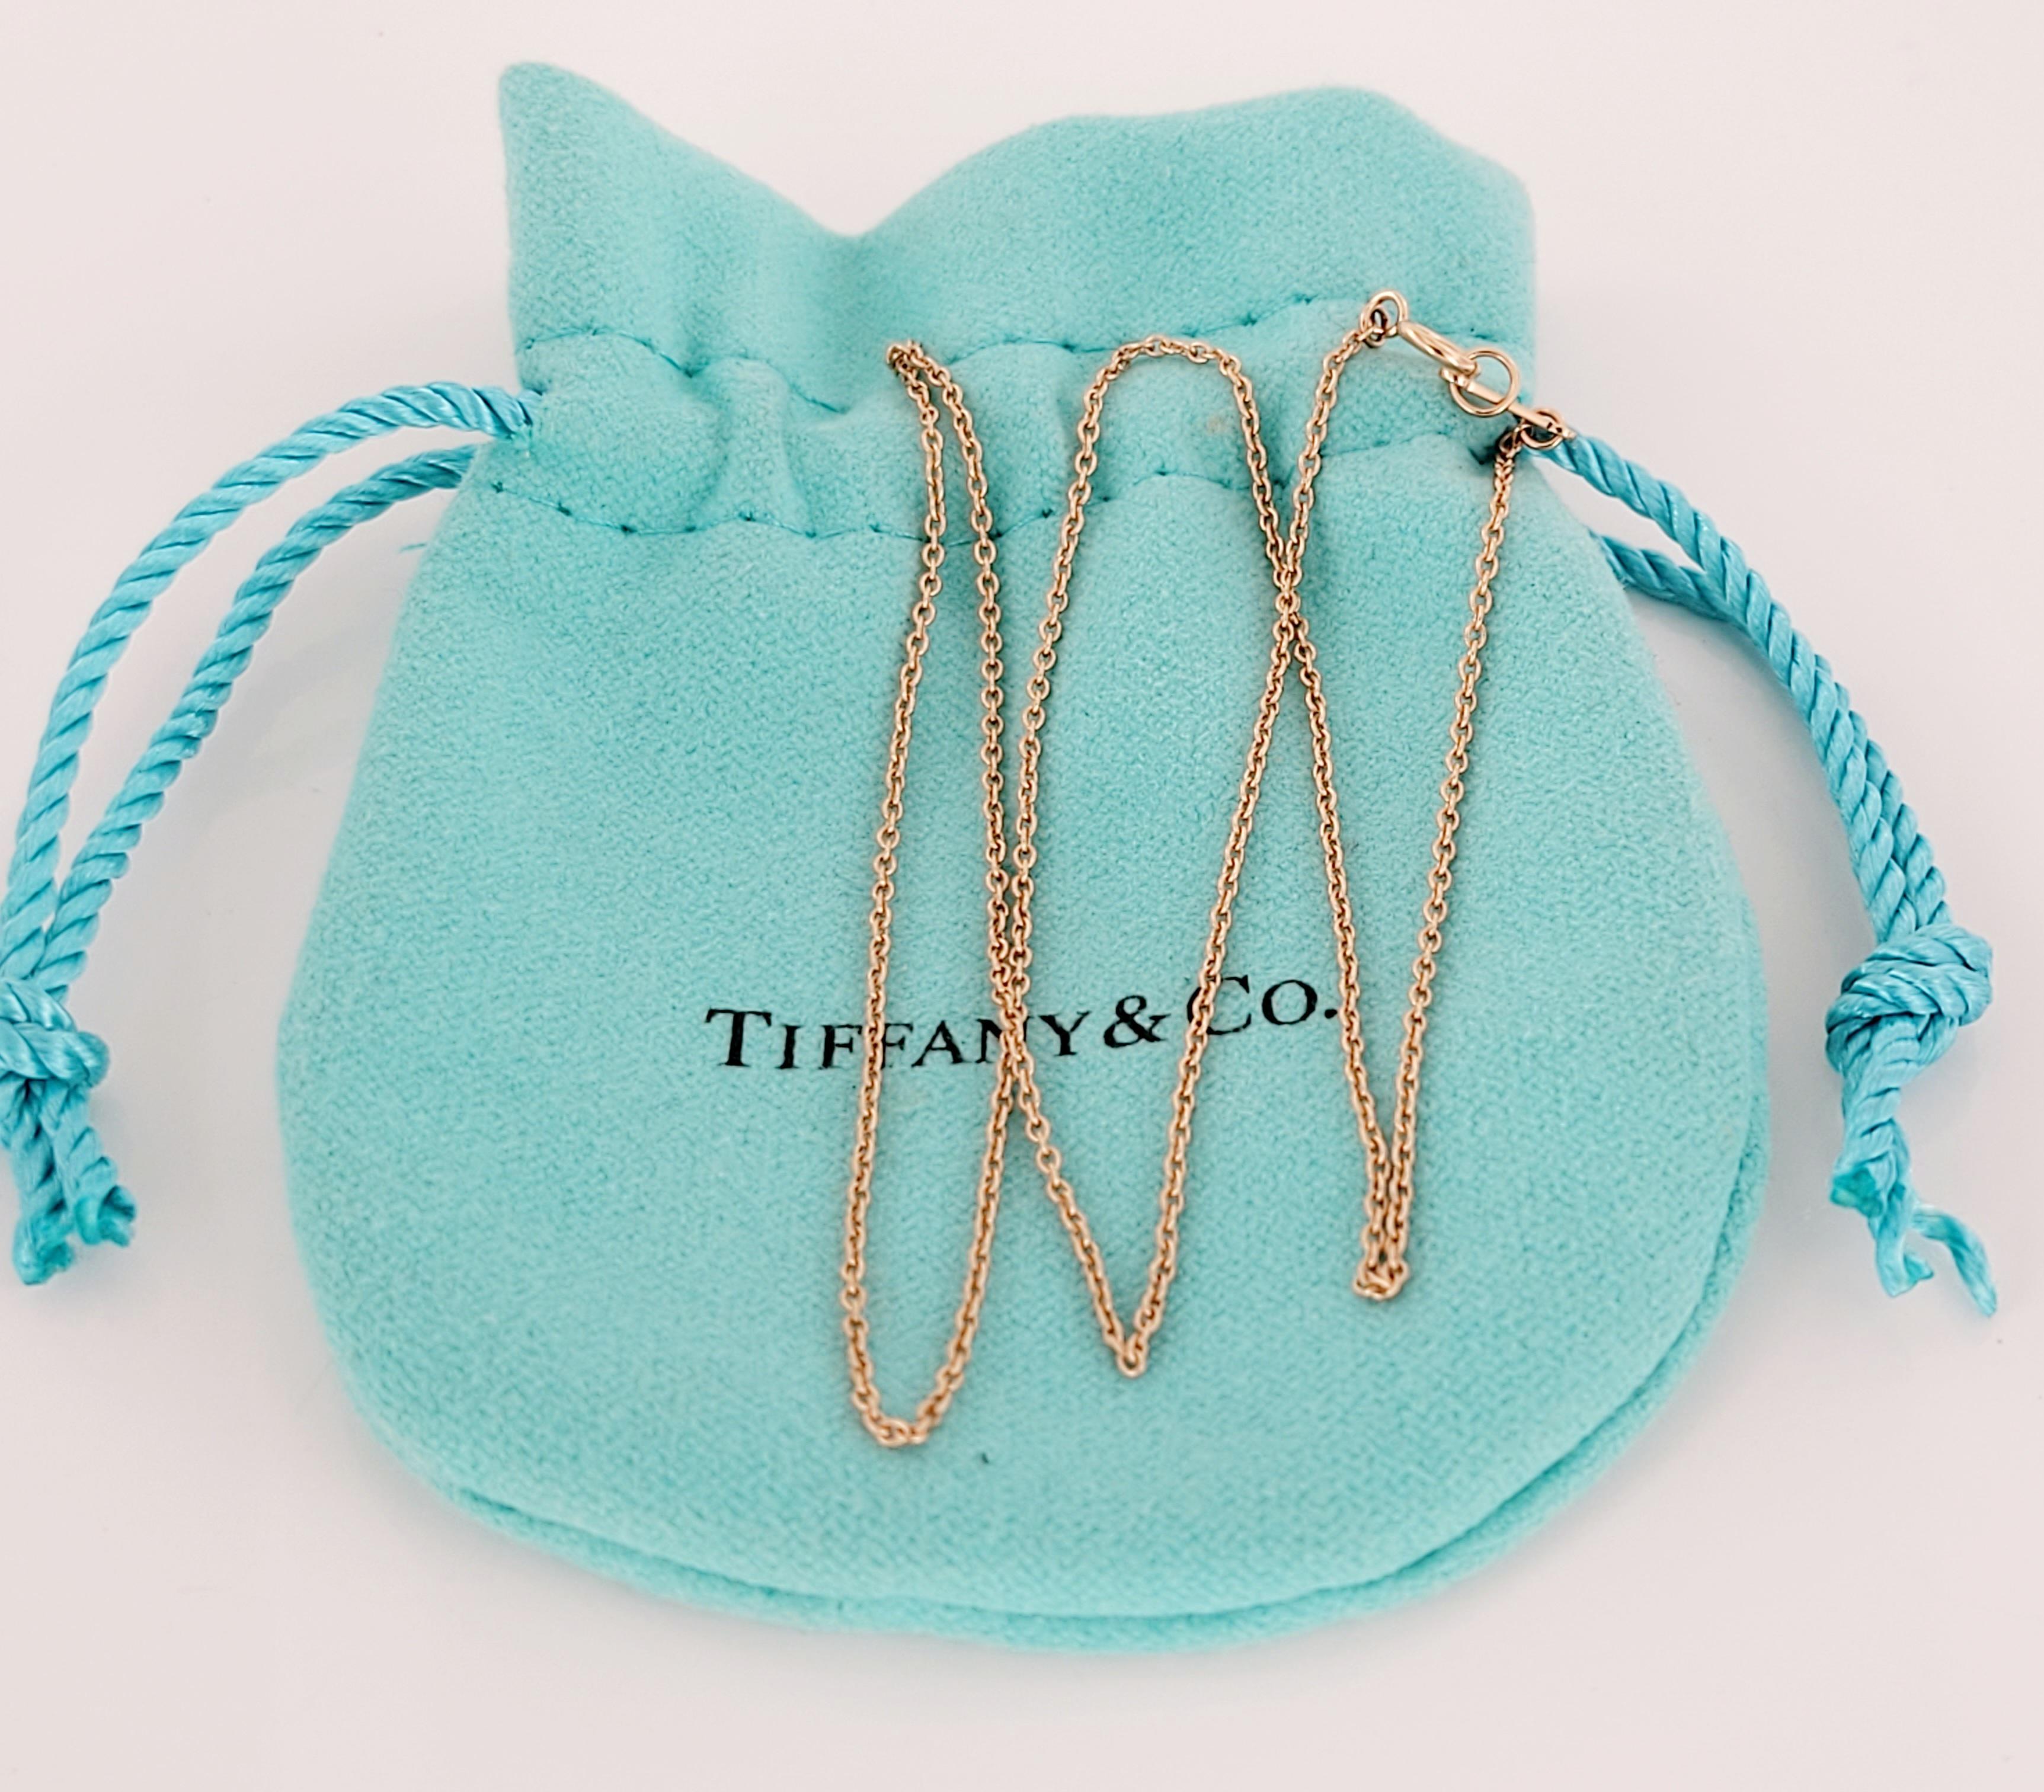 Paloma Picasso Tiffany & Co Chain
Material 18K Rose Gold 
Chain Length 16'' Long
Chain is not adjustable
Weight 1.7gr
Gender Unisex
Condition New, never worn
Comes with Tiffany & co Pouch